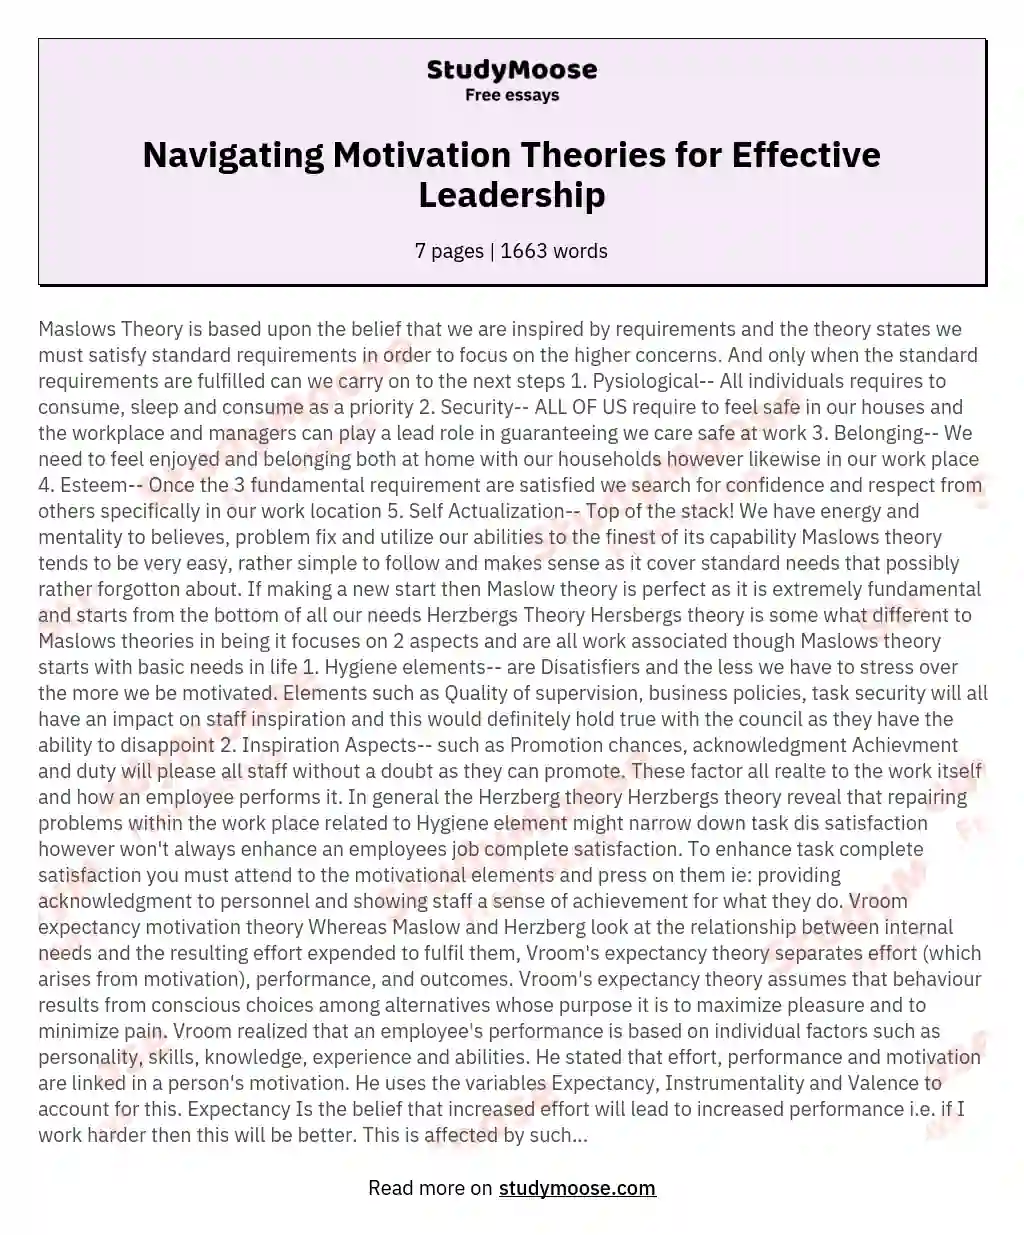 Navigating Motivation Theories for Effective Leadership essay